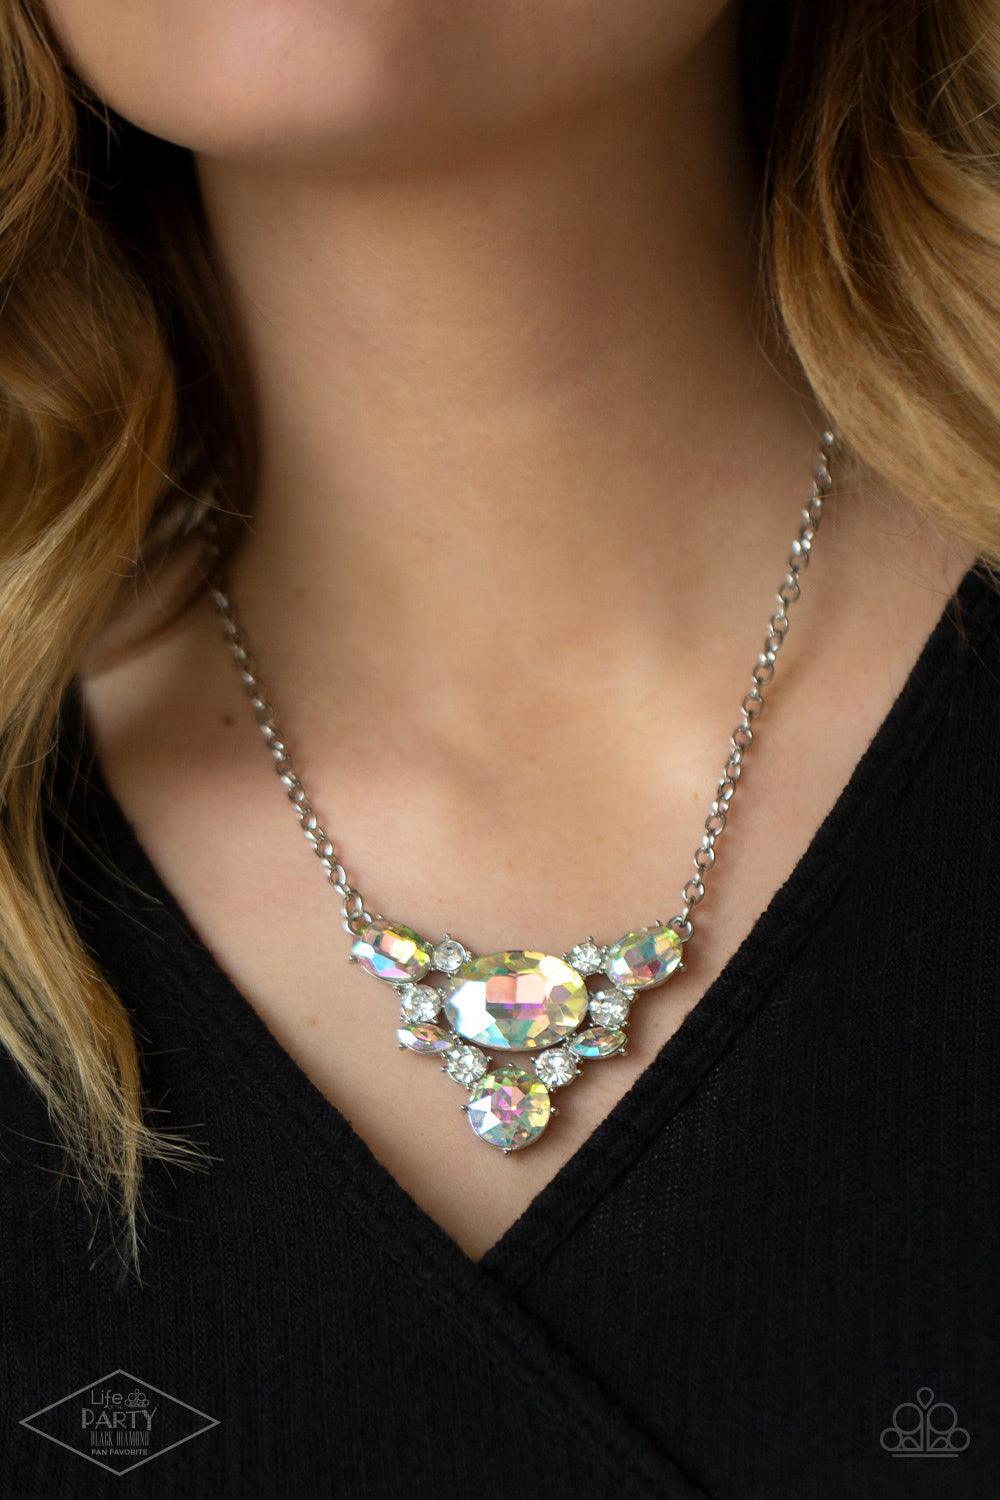 Paparazzi Accessories Cosmic Coronation - Multi Featuring a UV shimmer, oversized iridescent gems and glassy white rhinestones delicately coalesce into a v-shaped pendant below the collar for over-the-top glamour. Features an adjustable clasp closure. Sol